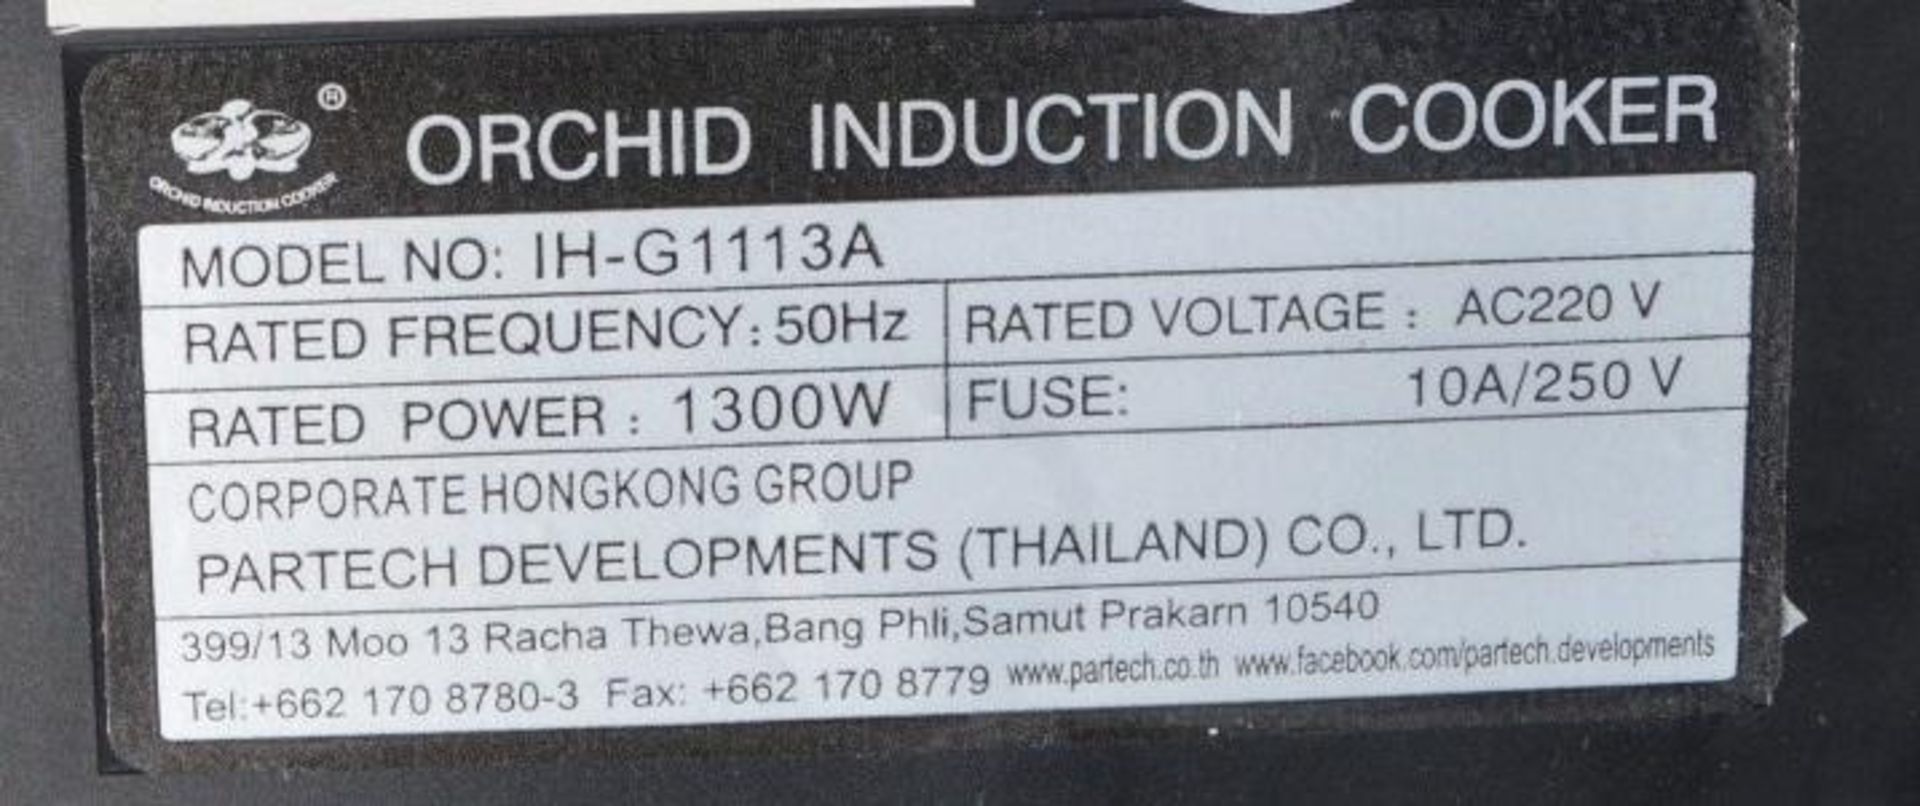 1 x Orchid IH-G1113A Induction Cooker - Pre-owned, Taken From An Asian Fusion Restaurant - Ref: MC79 - Image 2 of 4